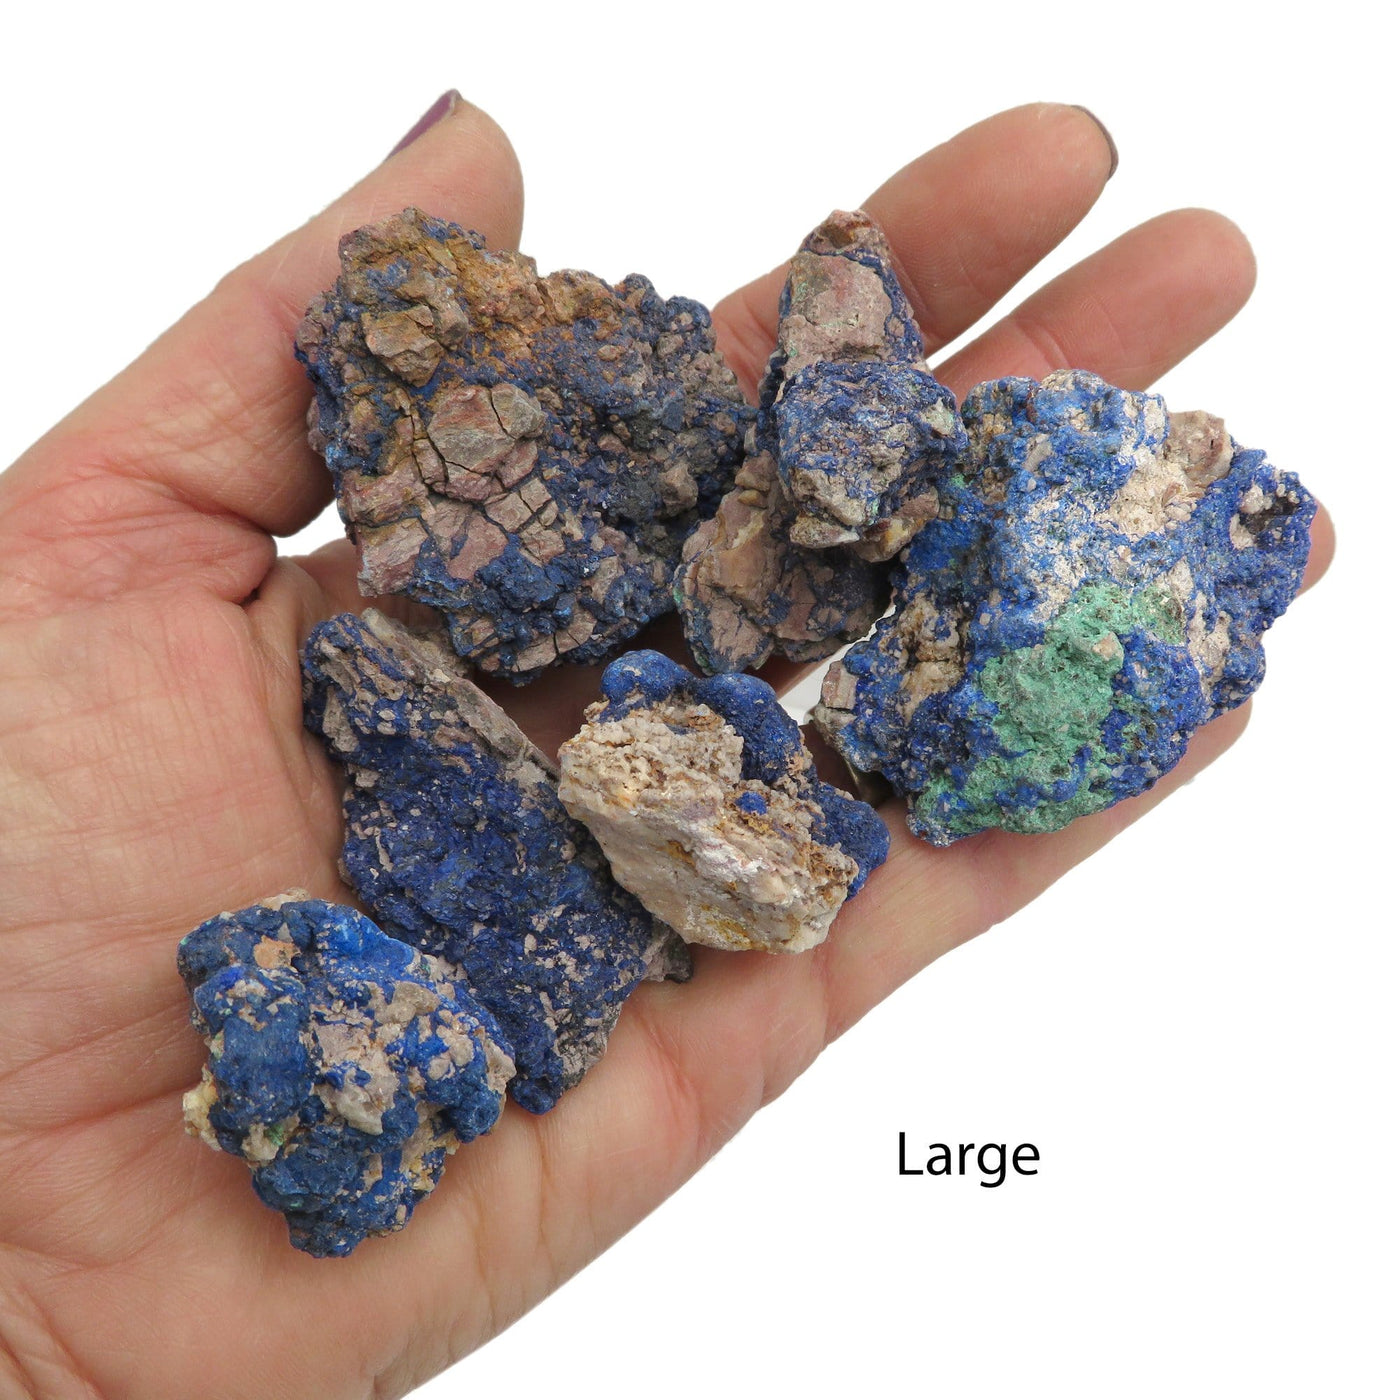 large azurite stone pieces in hand for size reference 